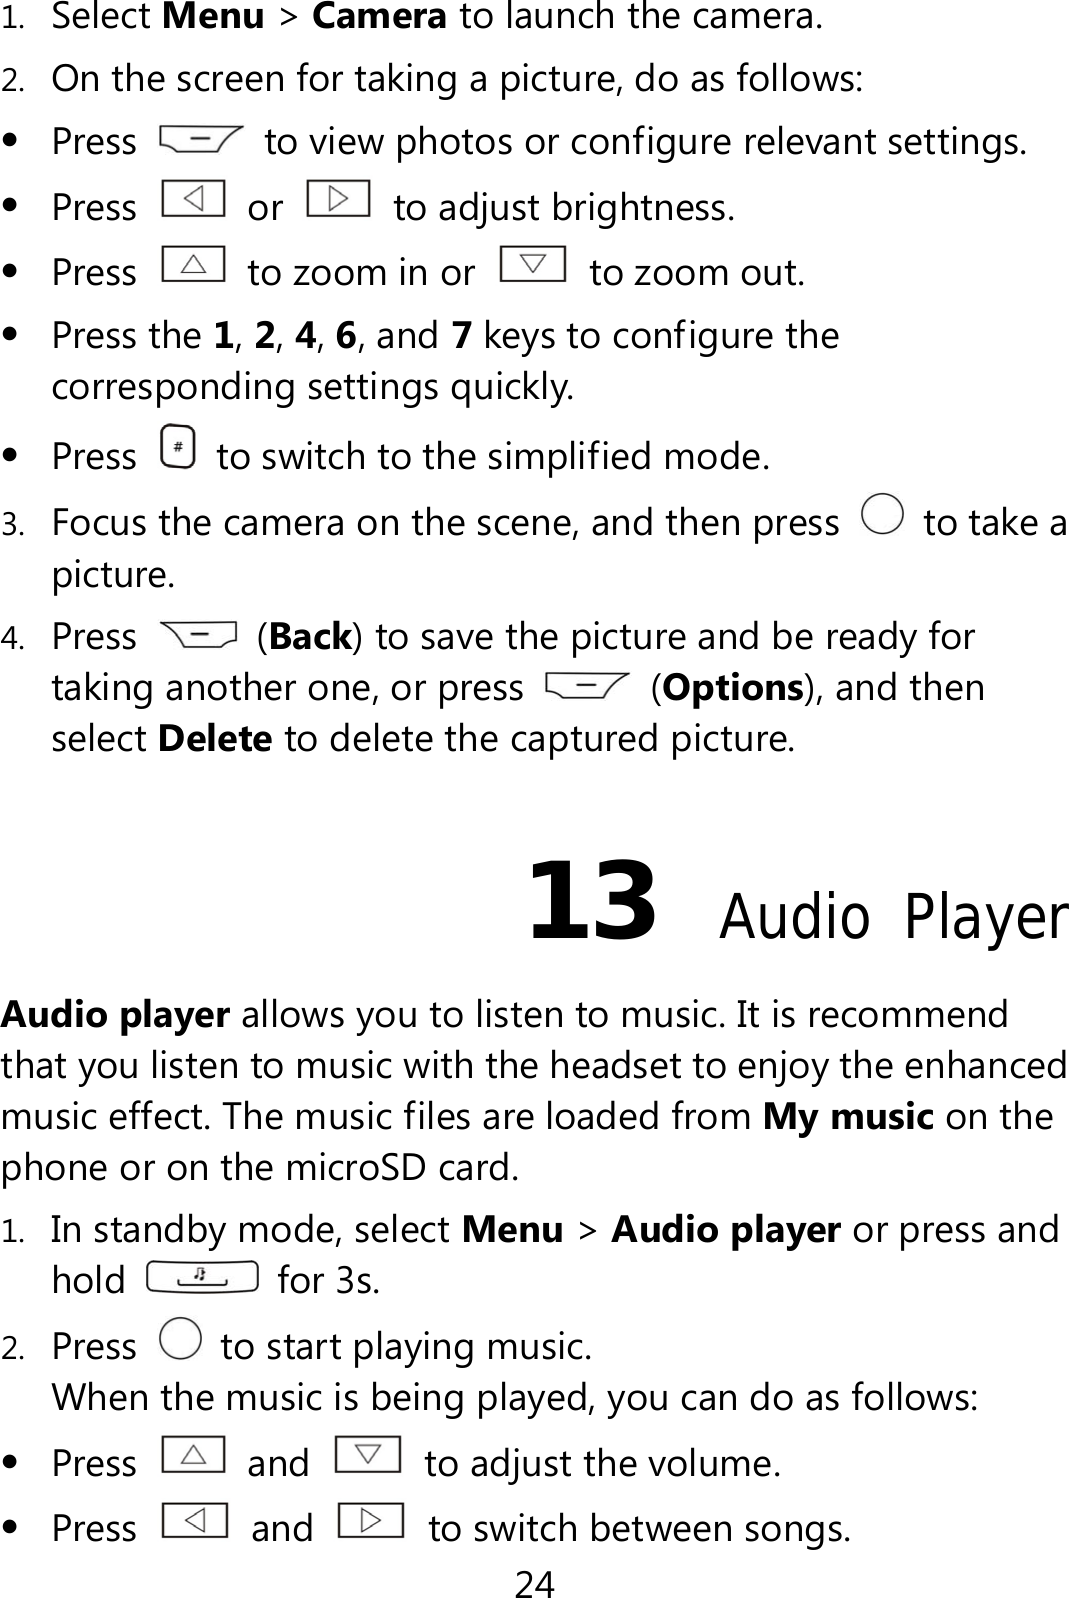 24 1. Select Menu &gt; Camera to launch the camera. 2. On the screen for taking a picture, do as follows:  Press    to view photos or configure relevant settings.  Press   or    to adjust brightness.  Press    to zoom in or    to zoom out.  Press the 1, 2, 4, 6, and 7 keys to configure the corresponding settings quickly.  Press    to switch to the simplified mode. 3. Focus the camera on the scene, and then press    to take a picture. 4. Press   (Back) to save the picture and be ready for taking another one, or press   (Options), and then select Delete to delete the captured picture. 13  Audio Player Audio player allows you to listen to music. It is recommend that you listen to music with the headset to enjoy the enhanced music effect. The music files are loaded from My music on the phone or on the microSD card. 1. In standby mode, select Menu &gt; Audio player or press and hold   for 3s. 2. Press    to start playing music. When the music is being played, you can do as follows:  Press   and    to adjust the volume.  Press   and    to switch between songs. 